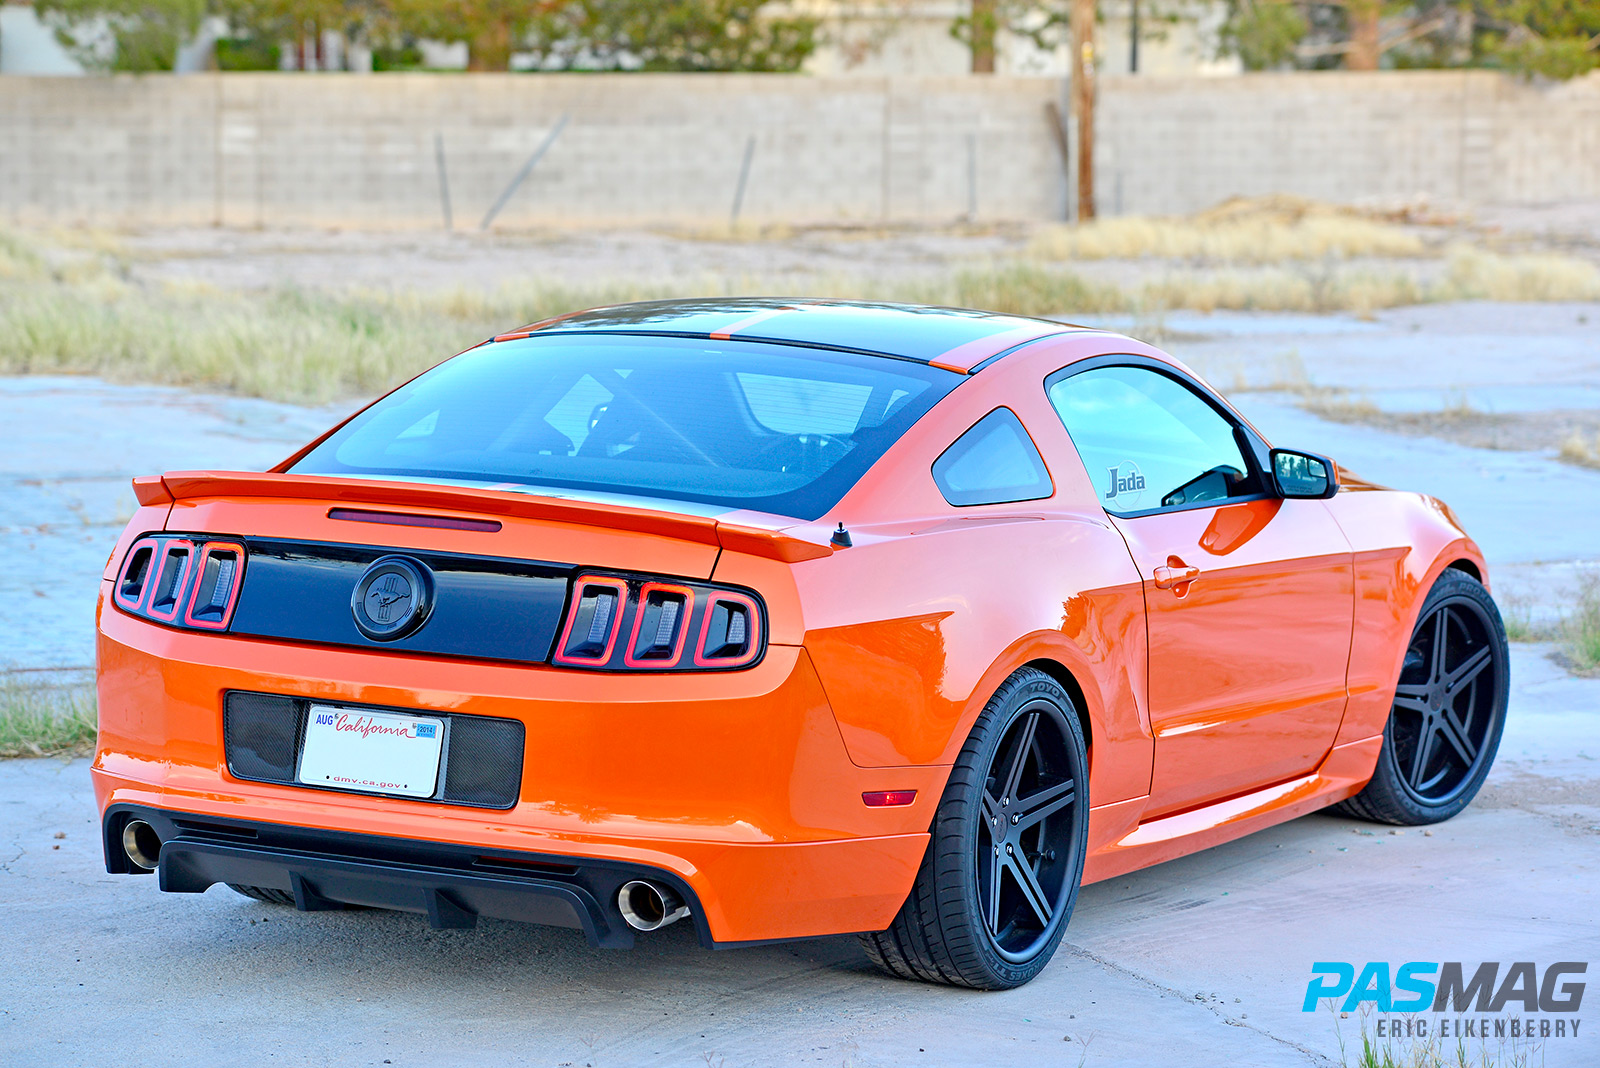 Model Behaviour: Michael Ma's 2013 Ford Mustang